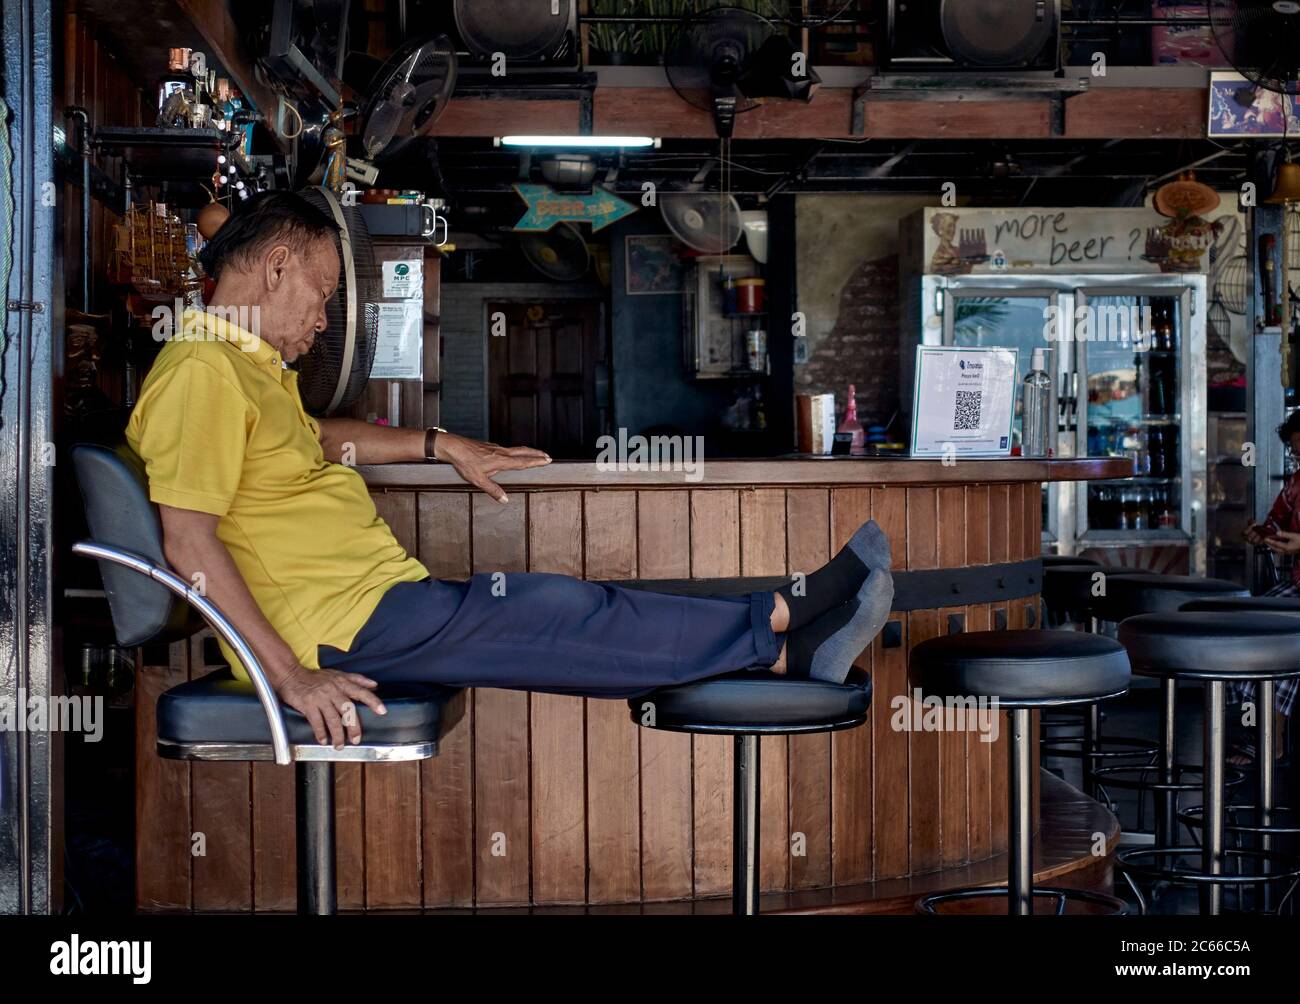 Concept Covid 19 virus lockdown and effect on business with owner asleep at his beer bar devoid of customers. Thailand Southeast Asia Stock Photo